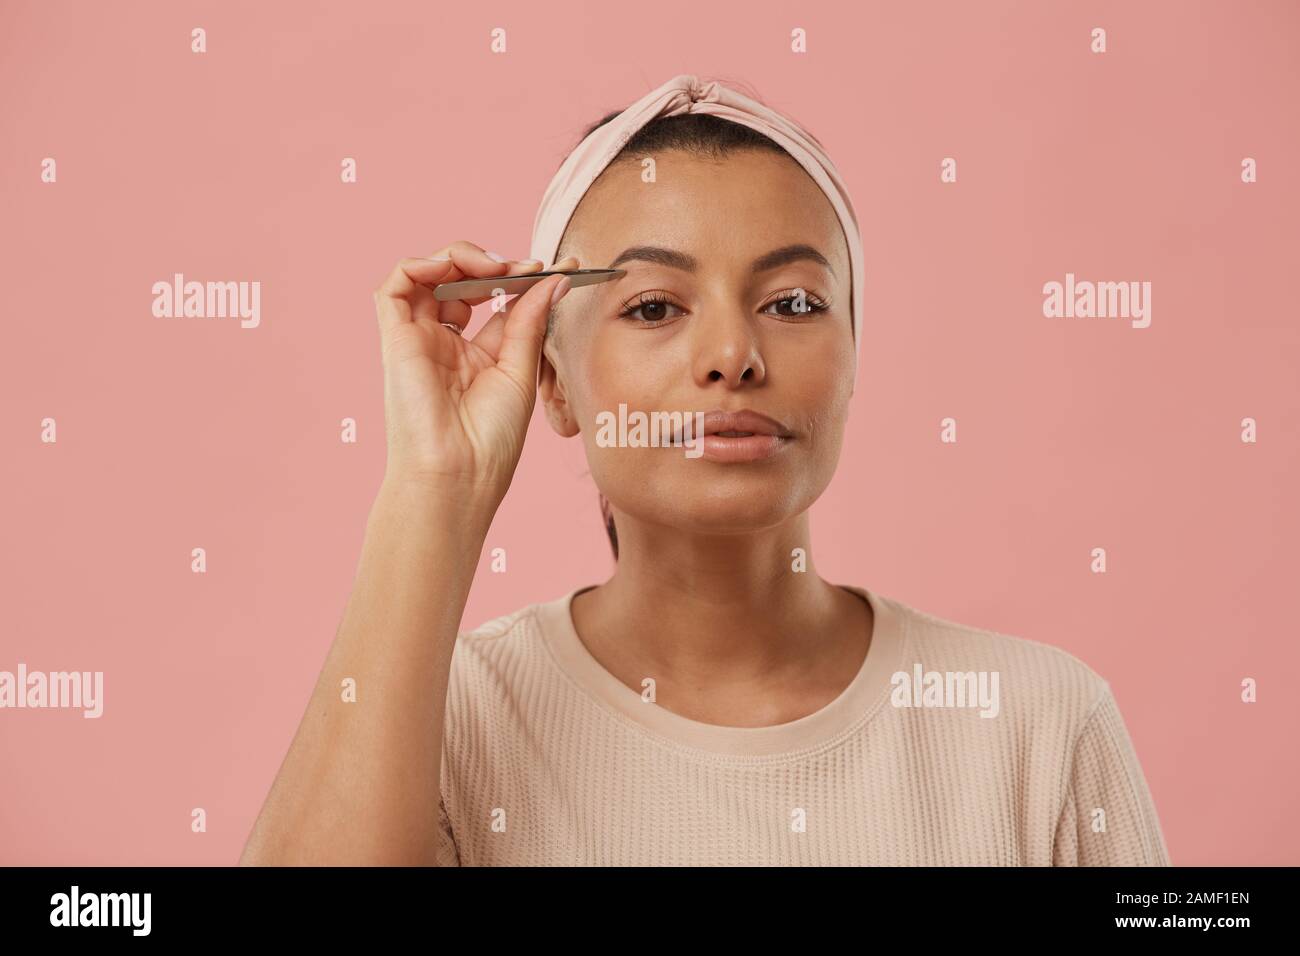 Head and shoulders portrait of beautiful mixed race woman plucking eyebrows while putting on makeup in morning standing against dust pink background, copy space Stock Photo